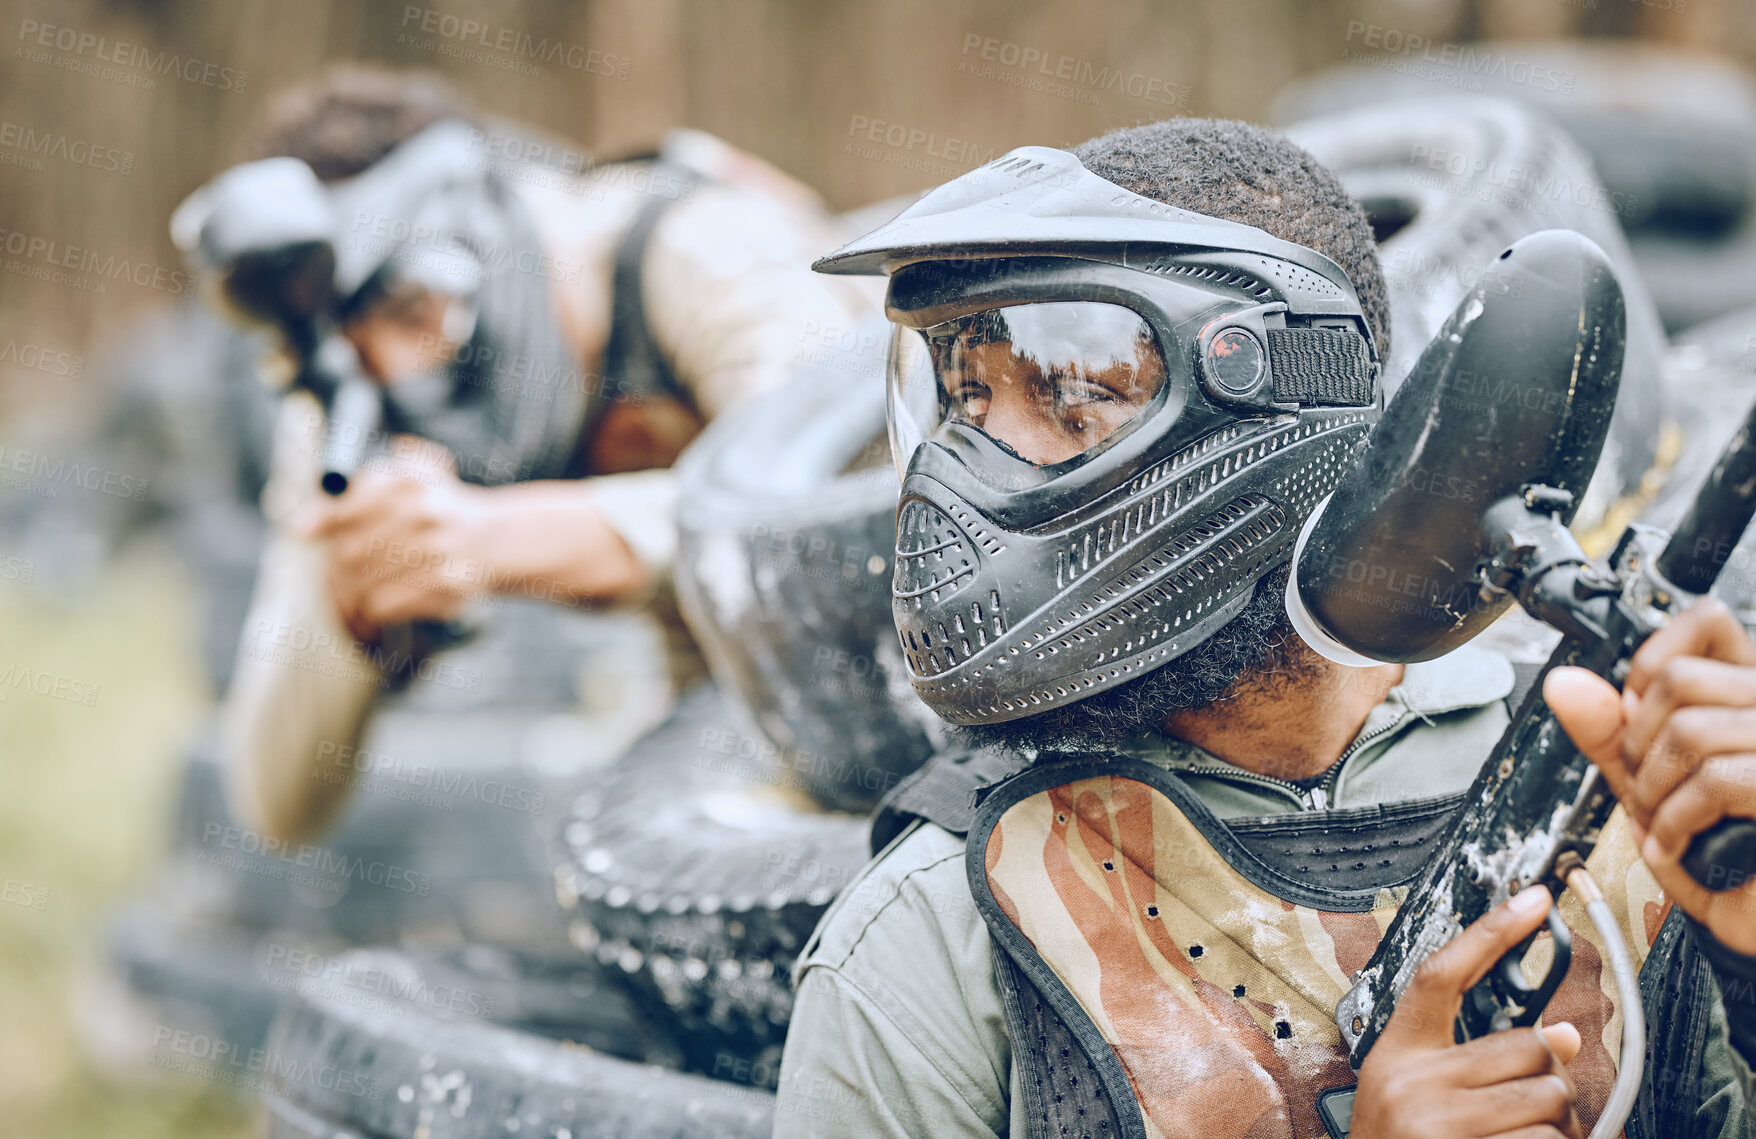 Buy stock photo Paintball, warrior or black man thinking in a shooting game of fighting action on a fun battlefield. Mission focused, military or player with a gun or weapons for survival in an outdoor competition 